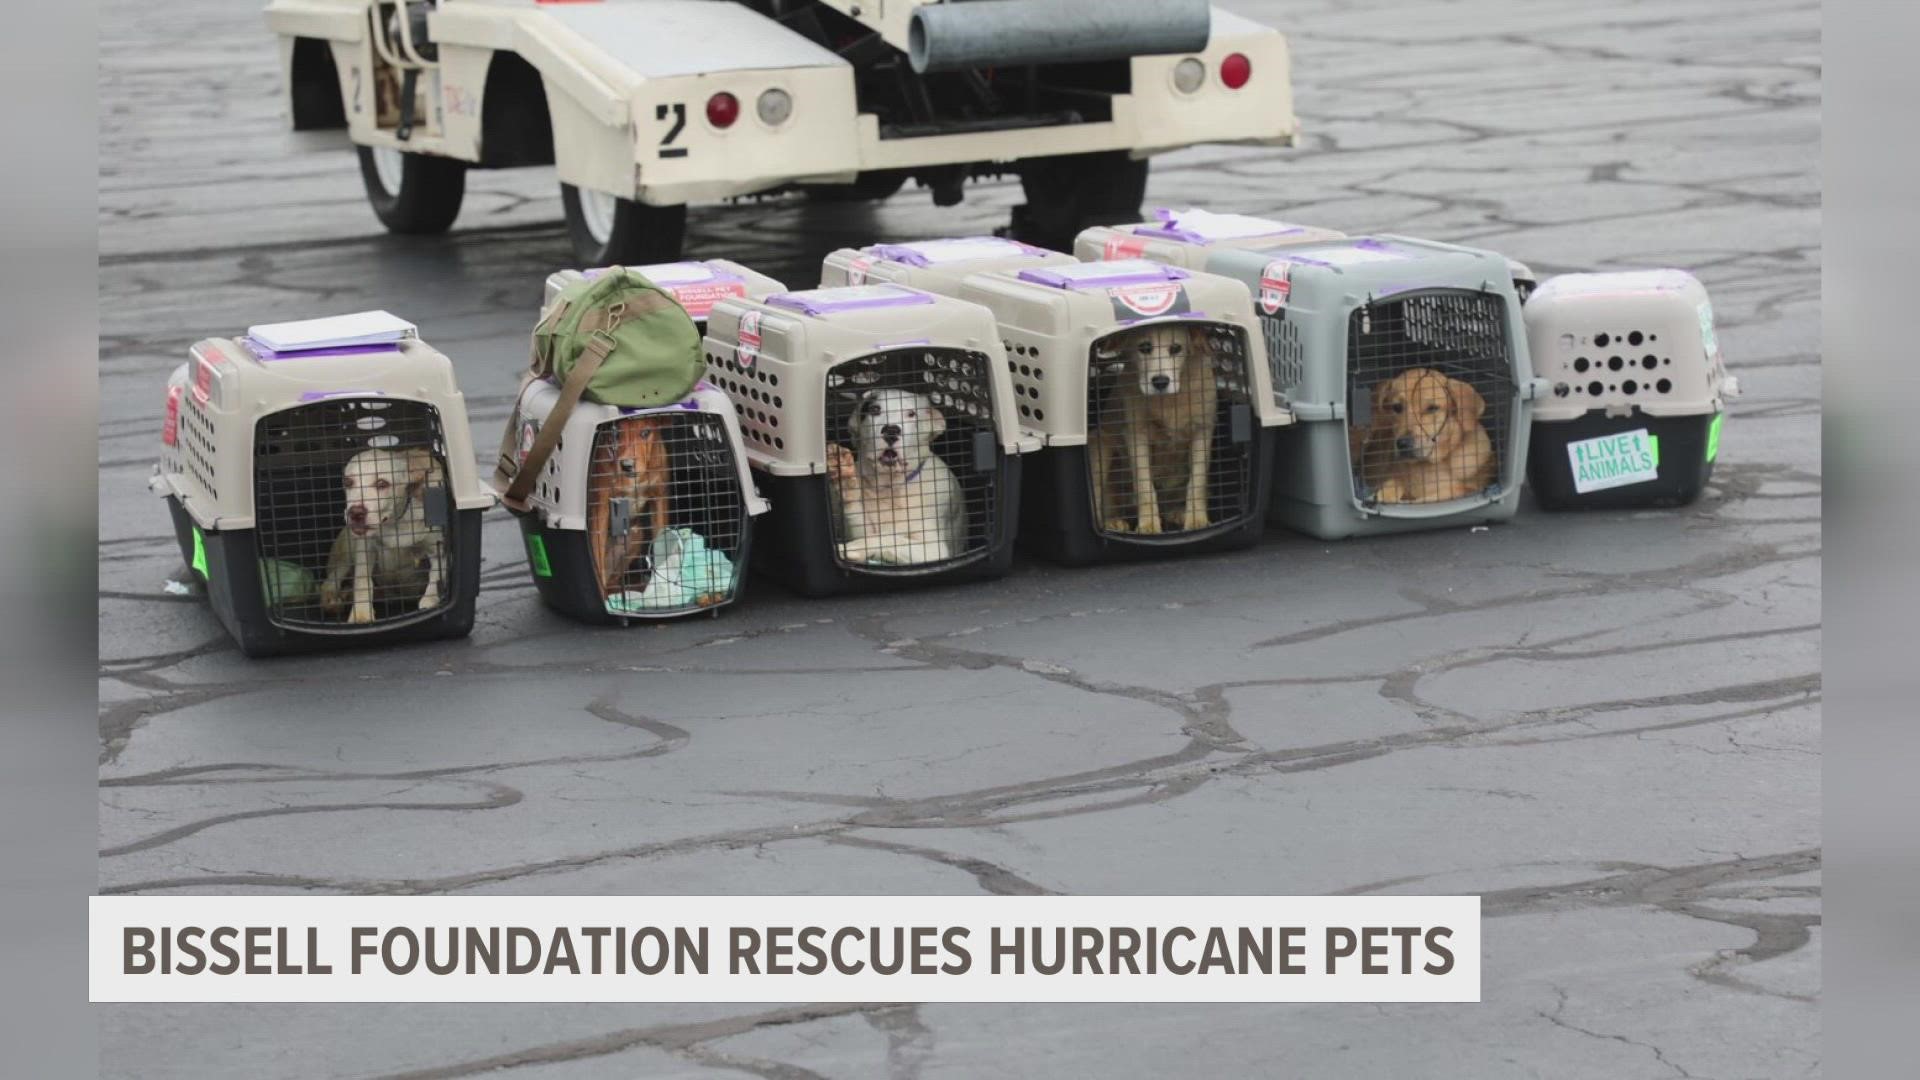 The organization is flying more than 100 pets to New York. A local pilot was asked to fly them to safety after road closures scrapped their driving plan.